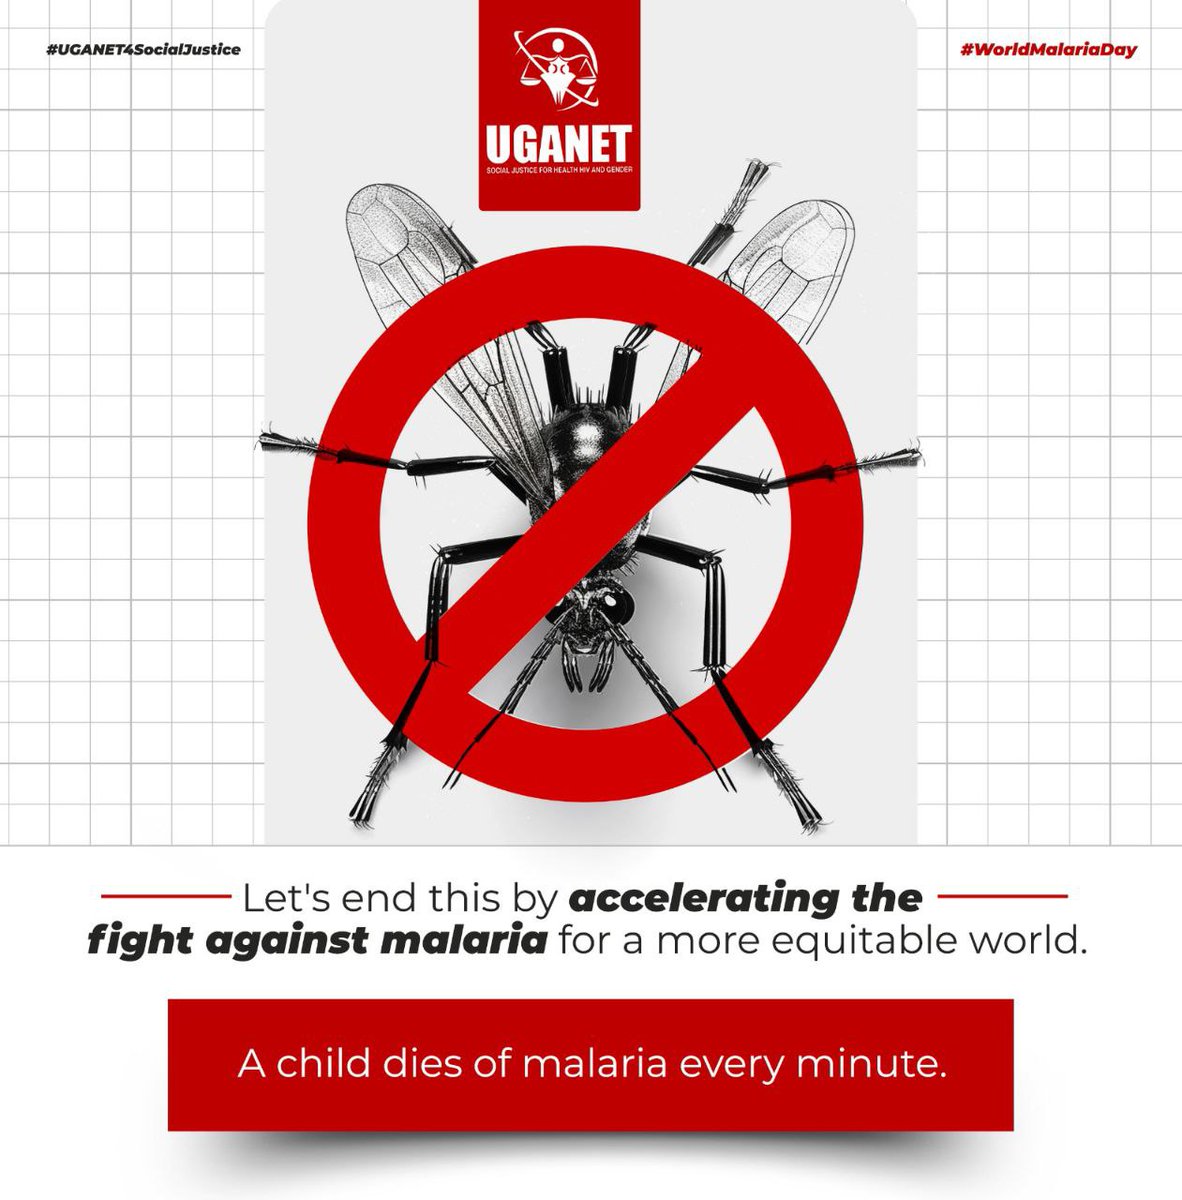 Did you know that a child dies of malaria every minute? Malaria is preventable and treatable. 📌 Together, we can accelerate the fight against malaria for a more equitable world. #WorldMalariaDay #UGANET4SocialJustice